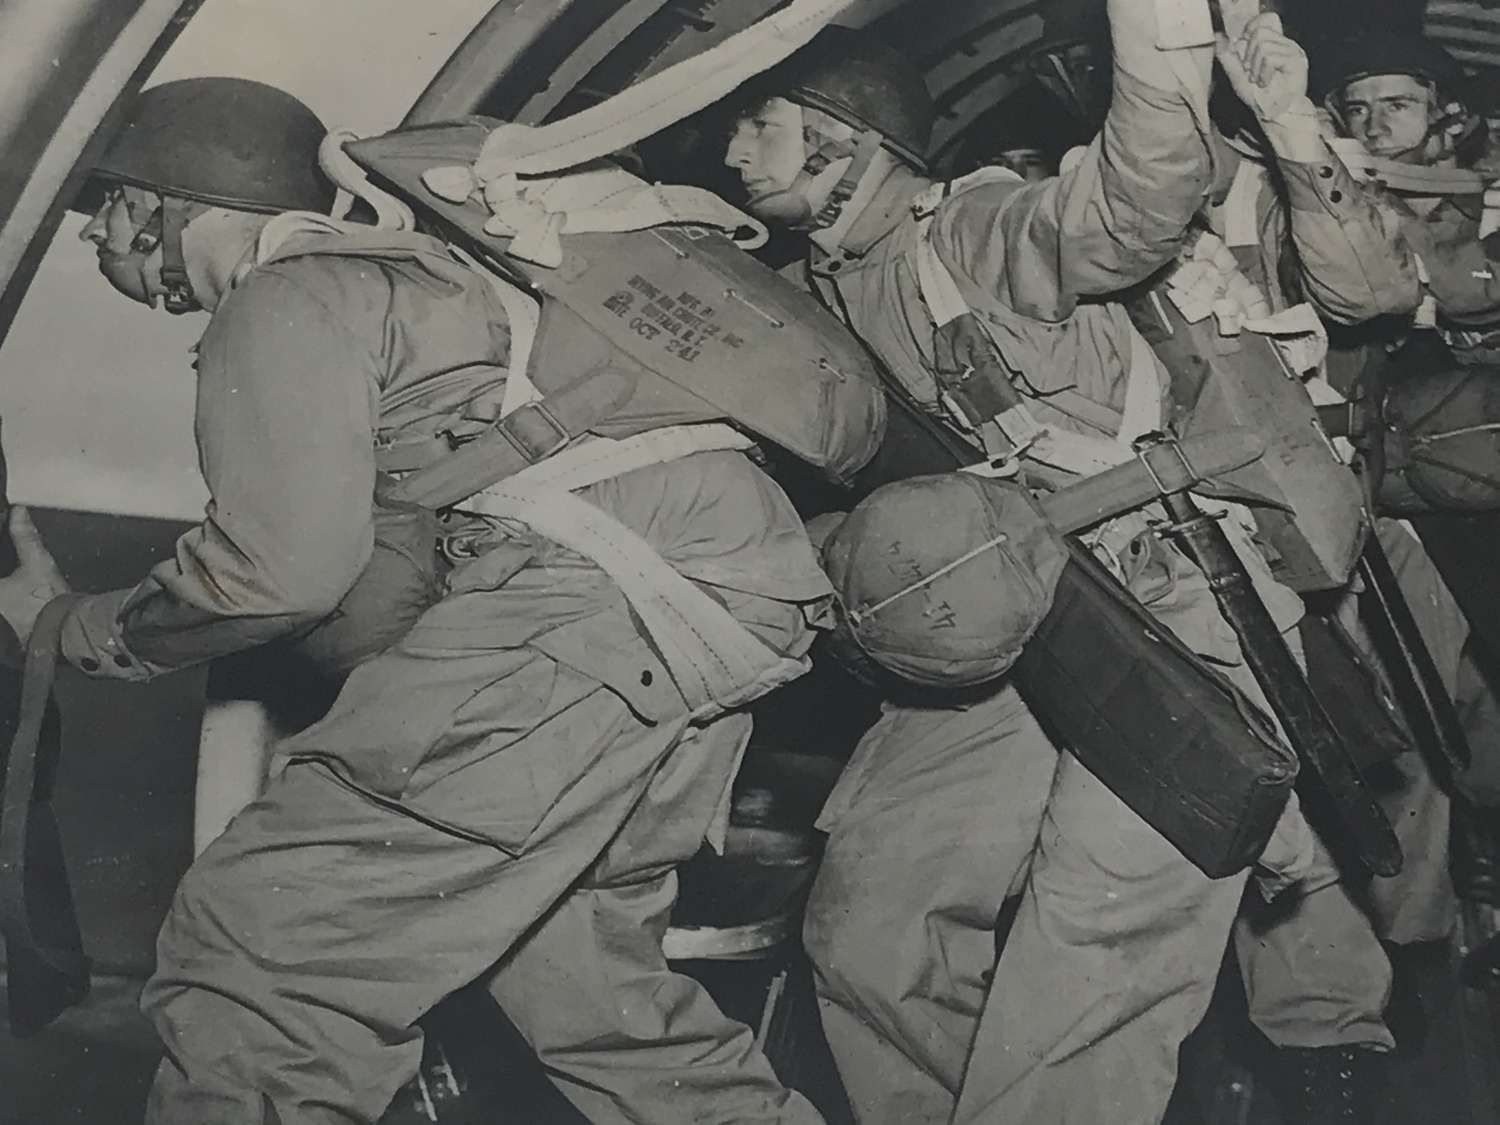 Press photo of American paratroopers, 1943